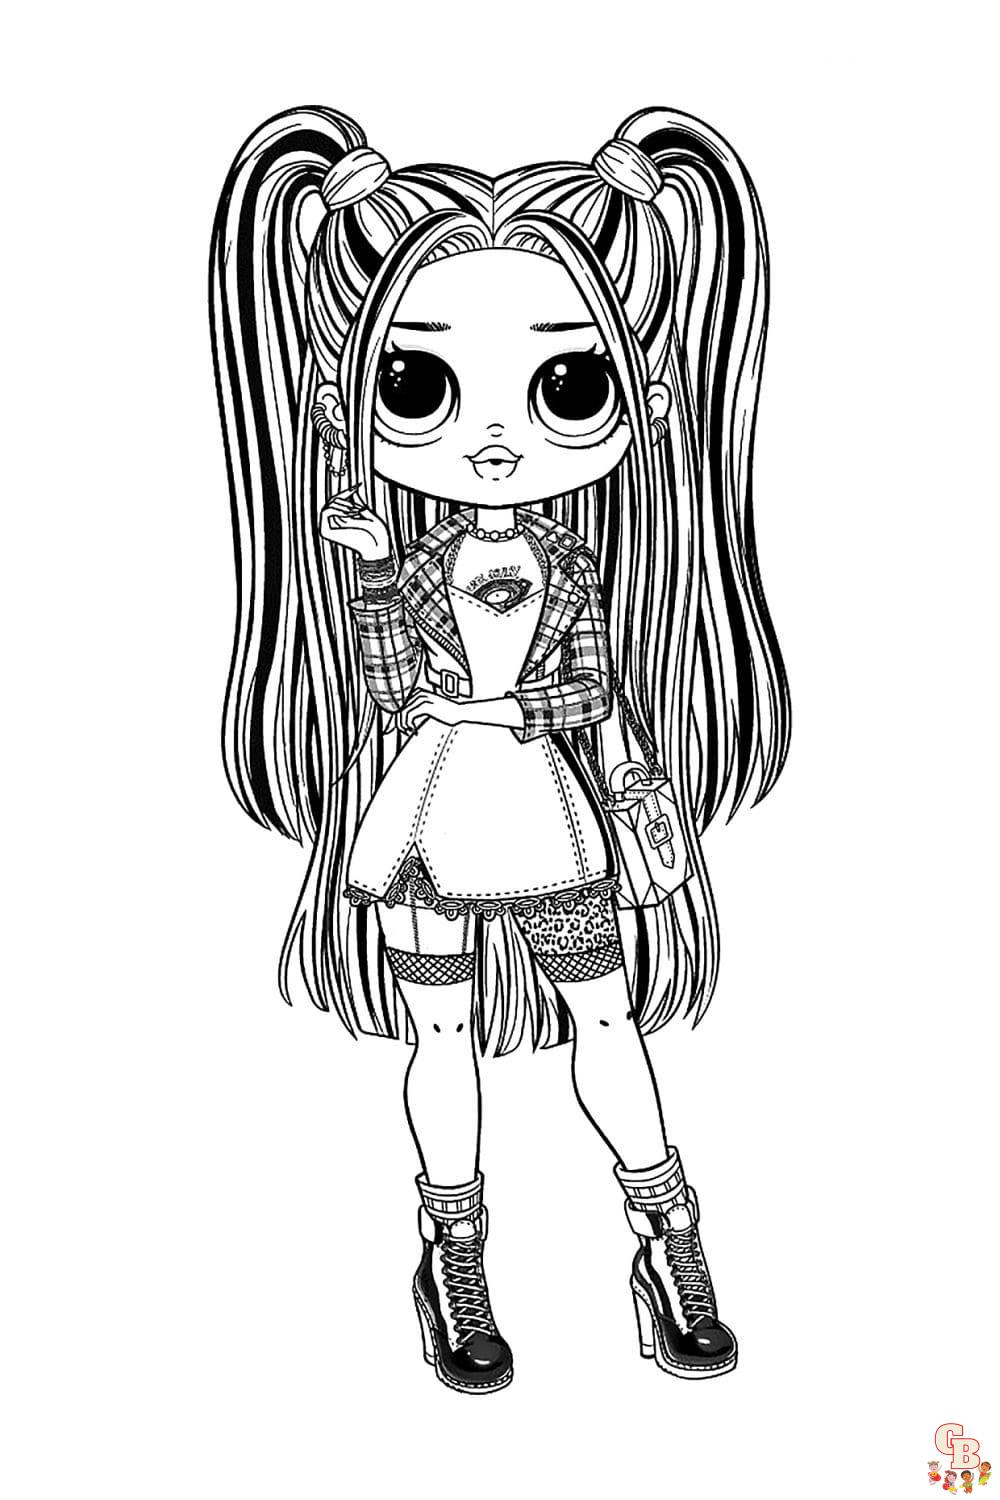 omg fashion lol omg doll coloring pages 7